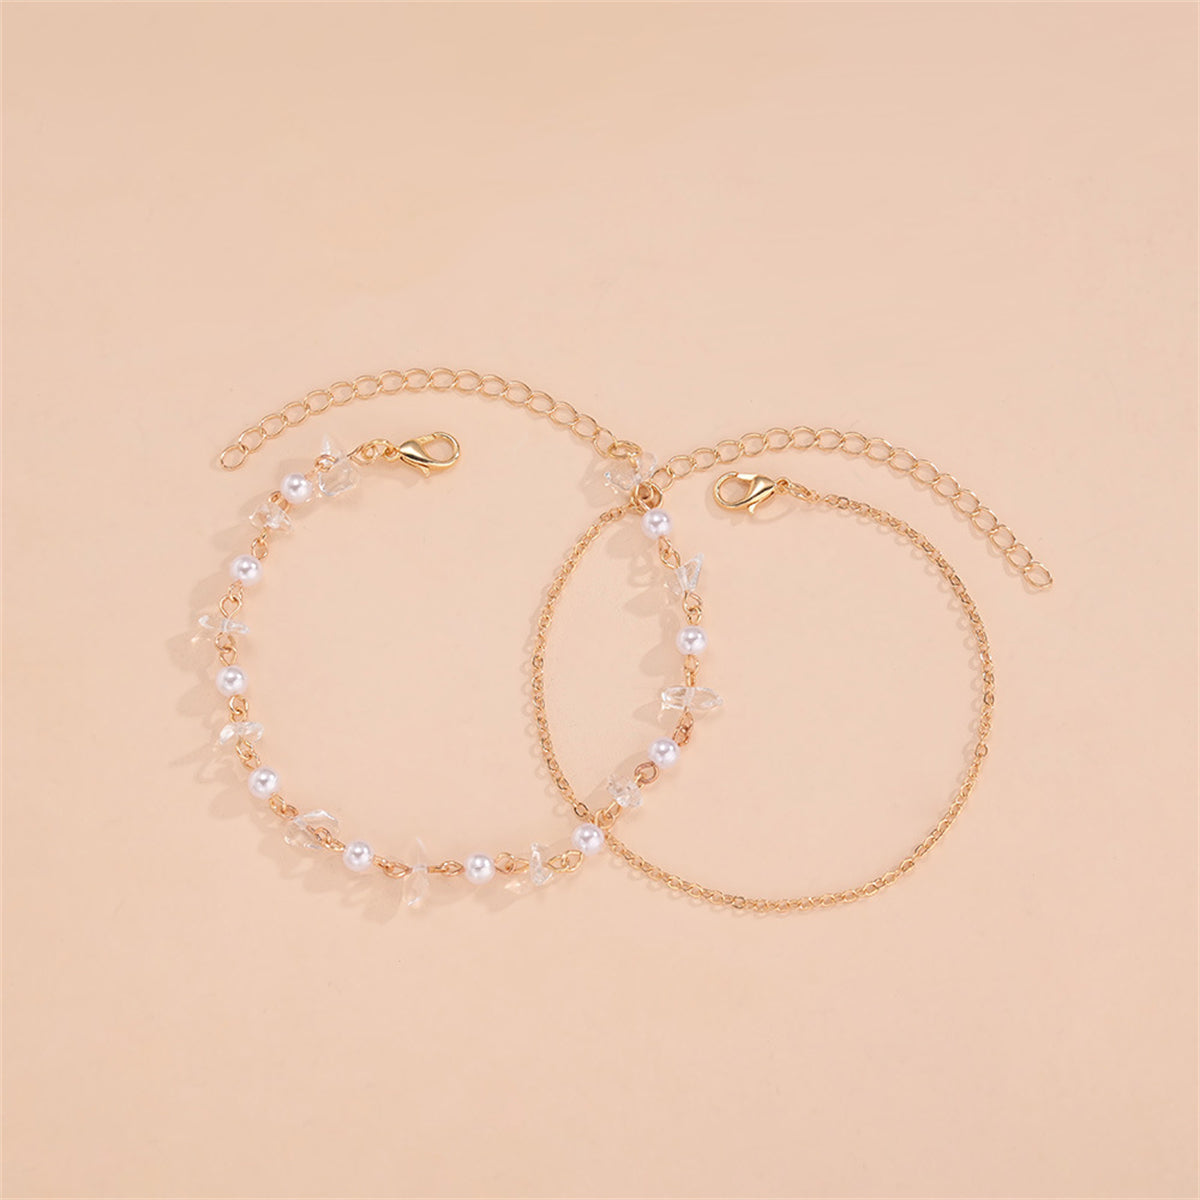 Pearl & Resin 18K Gold-Plated Beaded Anklet Set